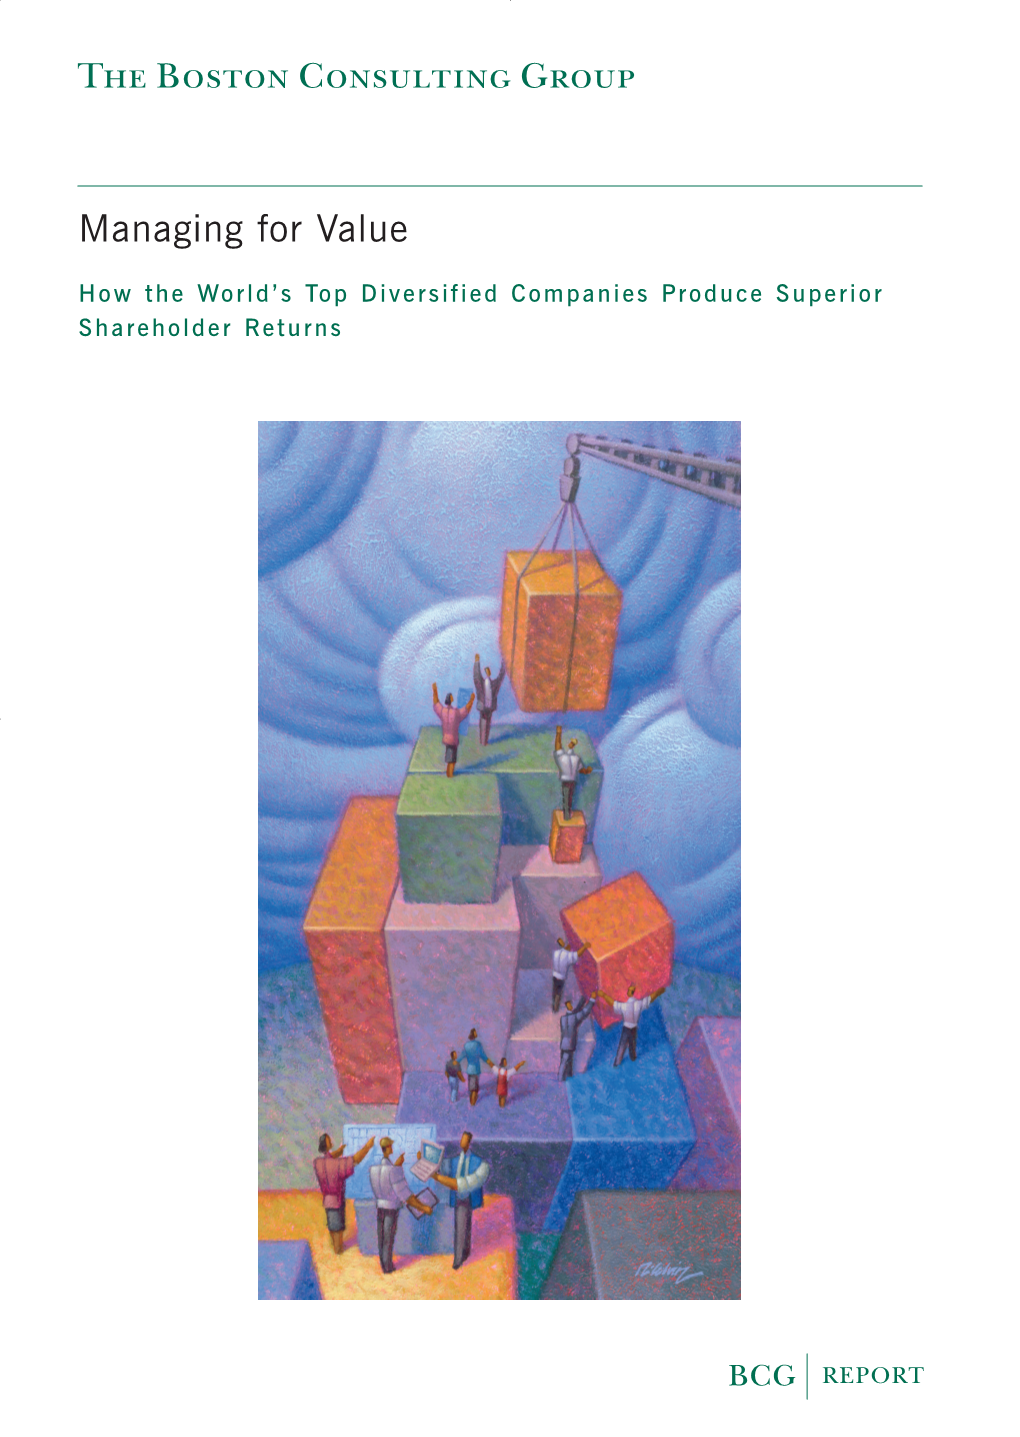 Managing for Value: How the World's Top Diversified Companies